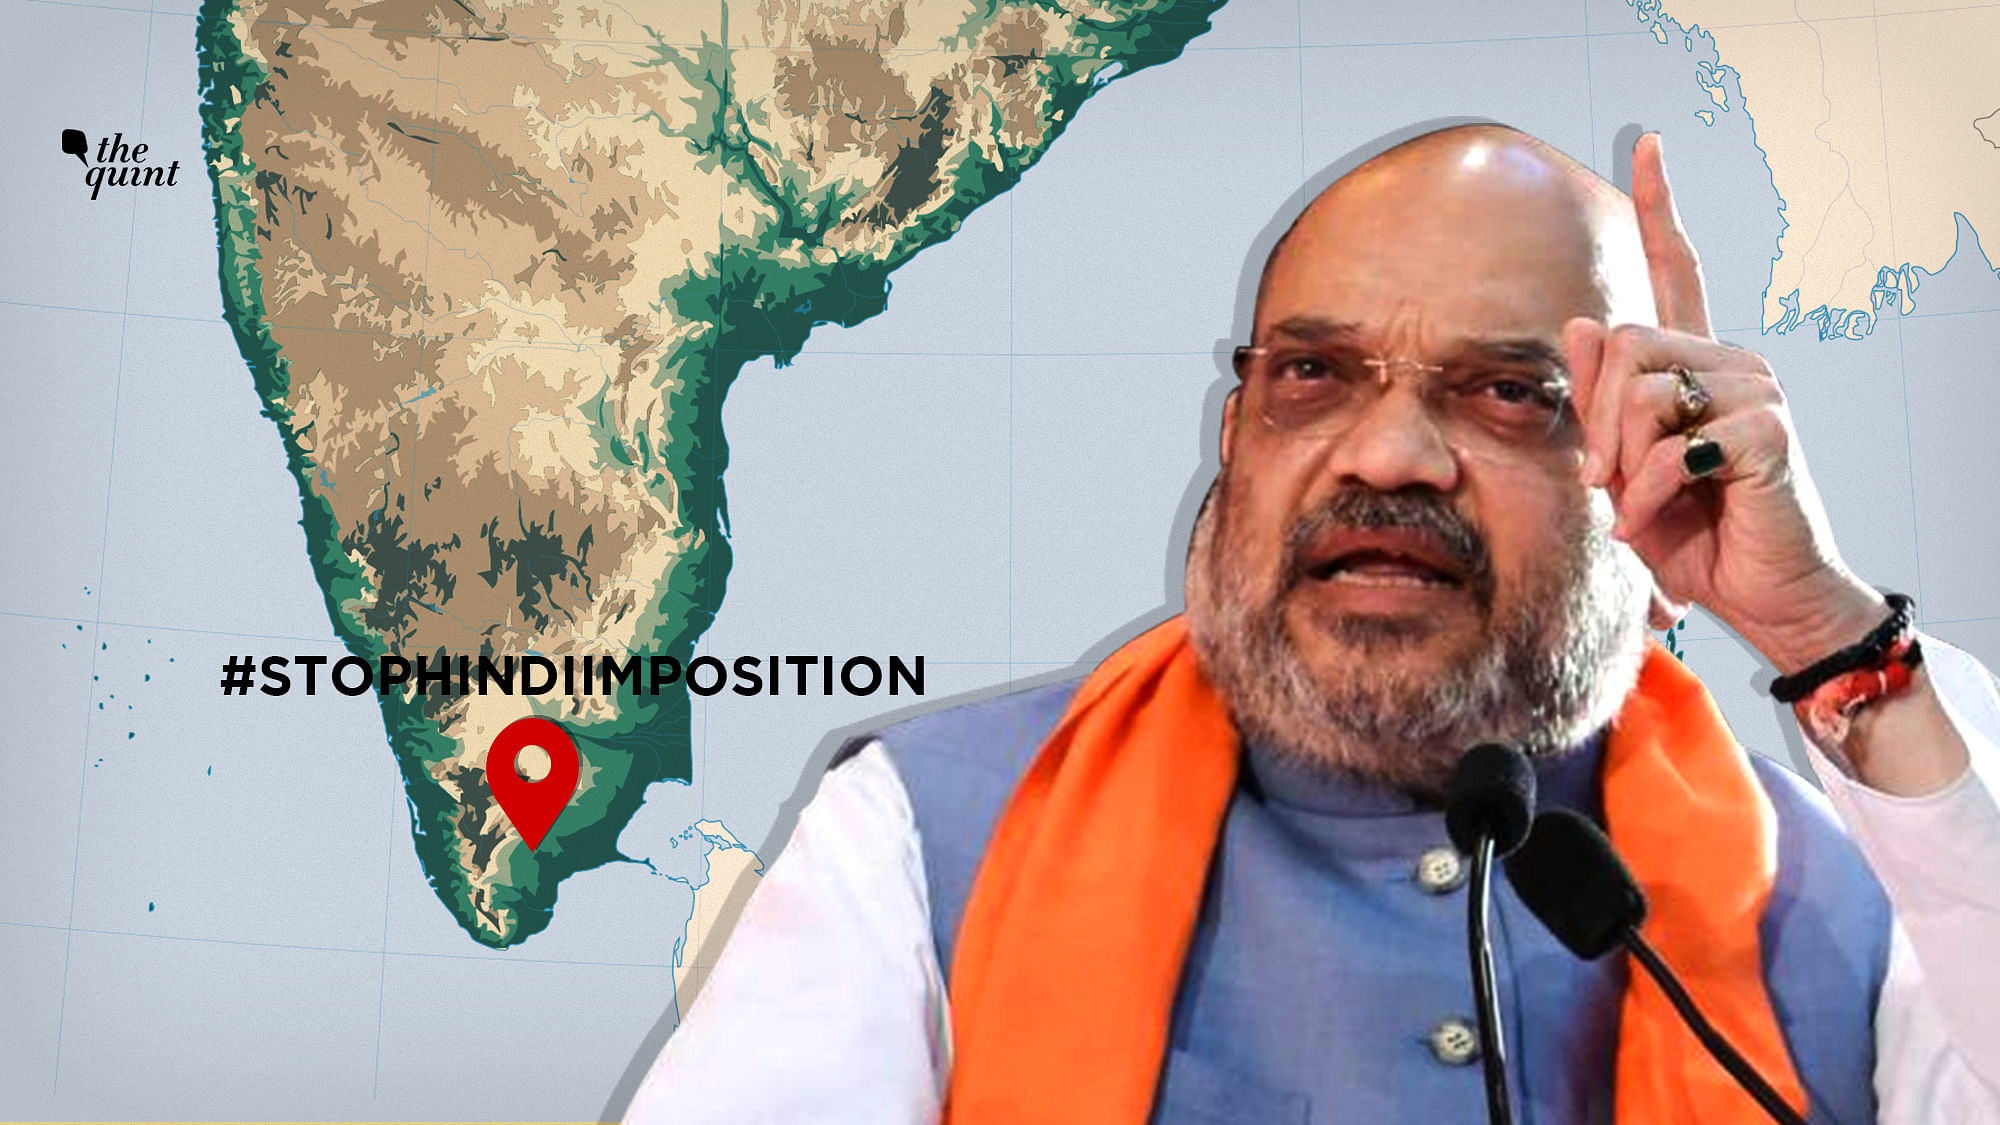 The hashtag #StopHindiImposition has emerged as a digital pushback against Home minister Amit Shah’s call for Hindi as the national language.